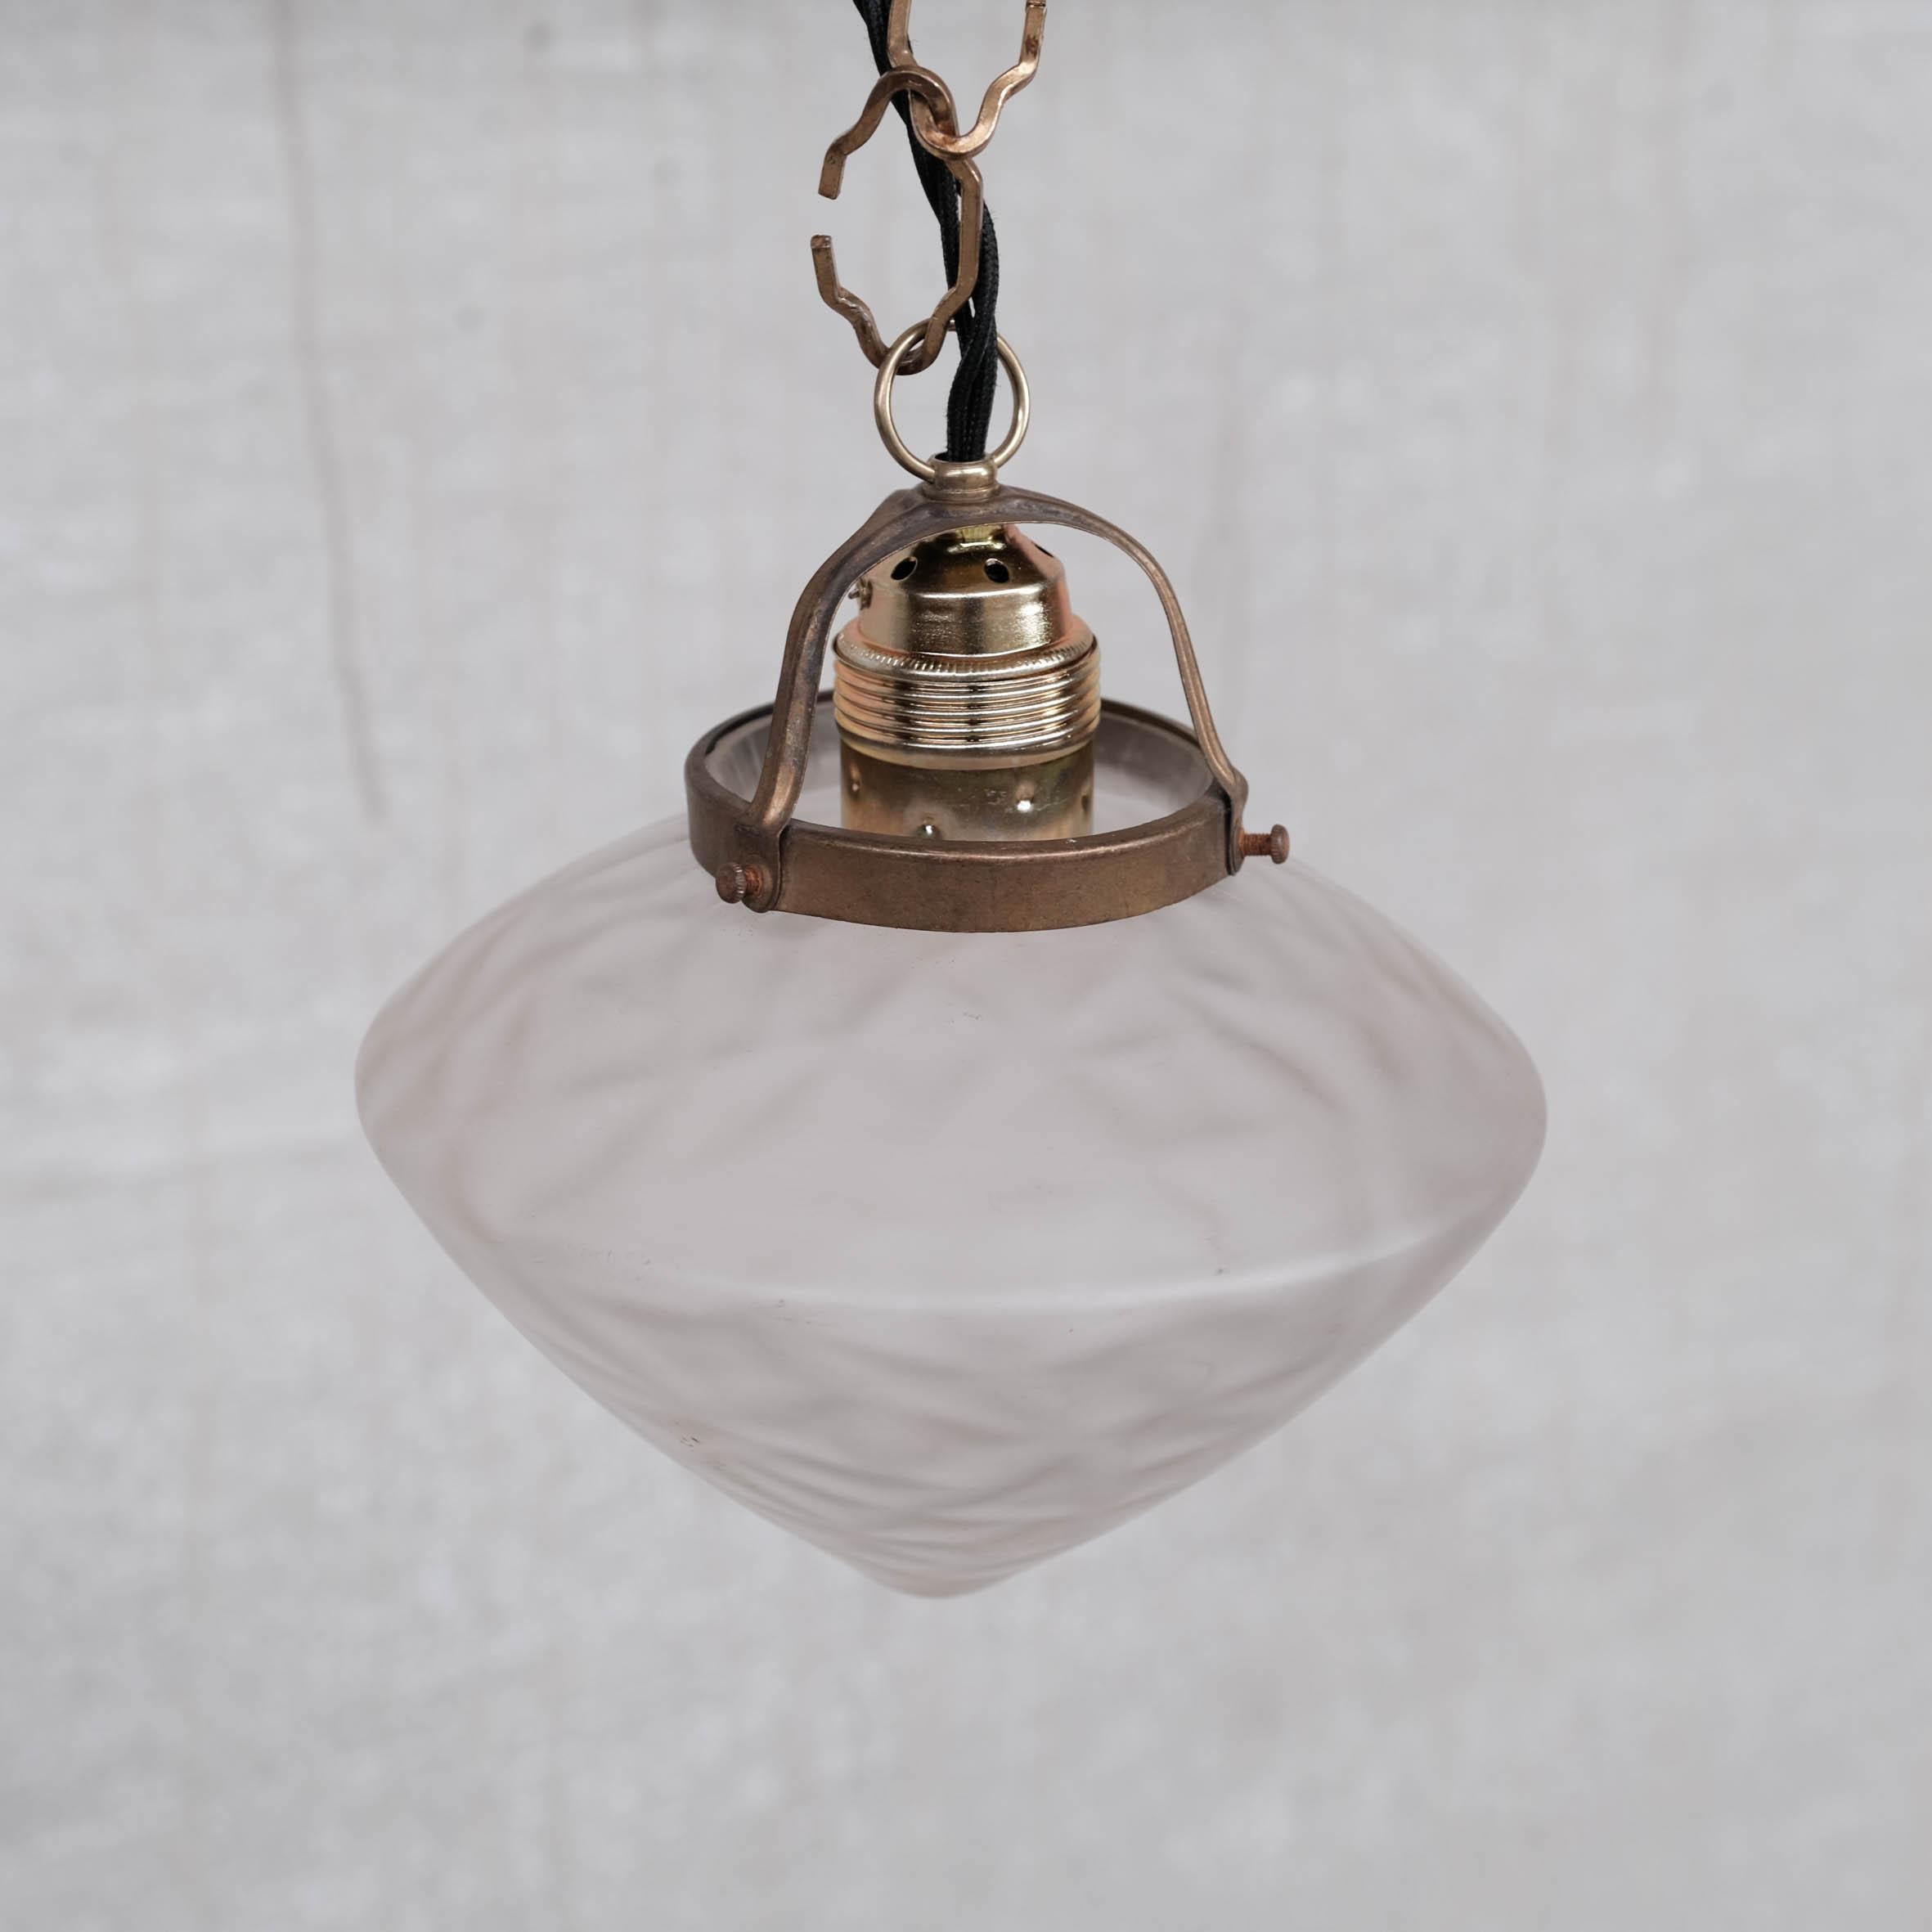 Unusual pendants with opaque decorative finish to the glass, mounted on original brass galleries. 

France, c1960s. 

Good vintage condition. 

Price and sold individually.

Re-wired and PAT tested. 

No original chain or rose was